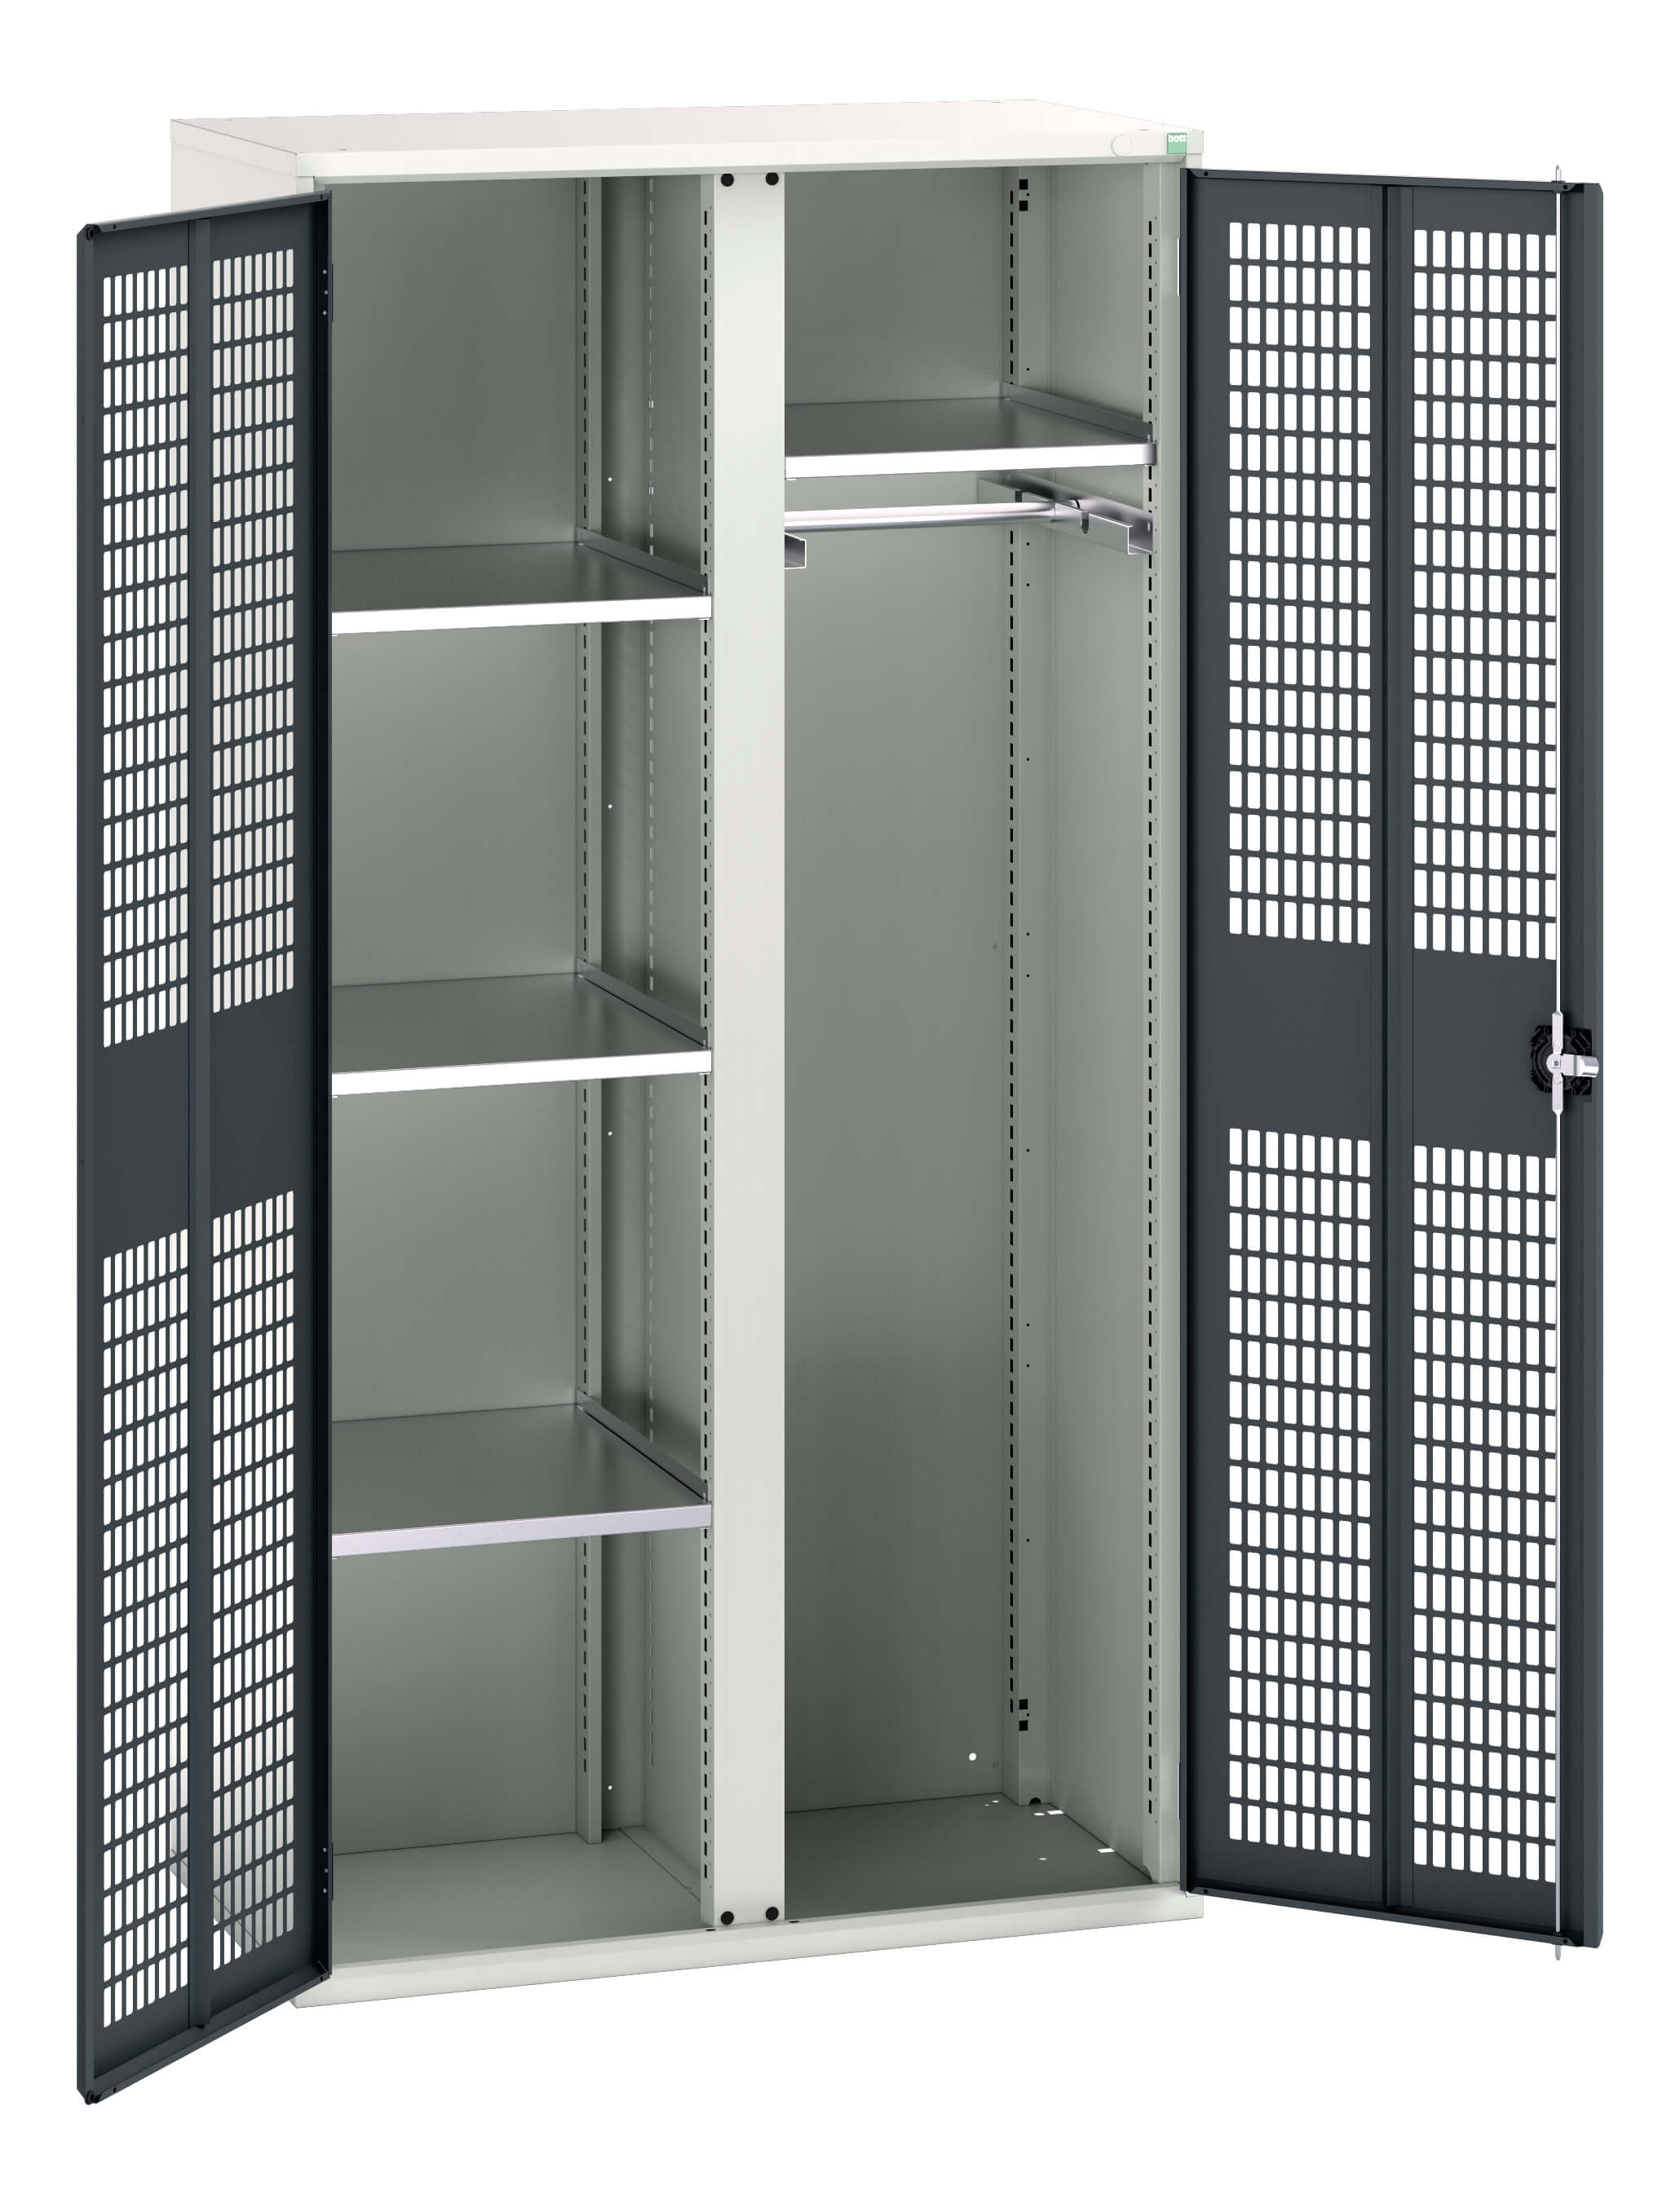 Bott Verso Ventilated Door Ppe / Janitorial Kitted Cupboard With Vertical Partition - 16926774.19